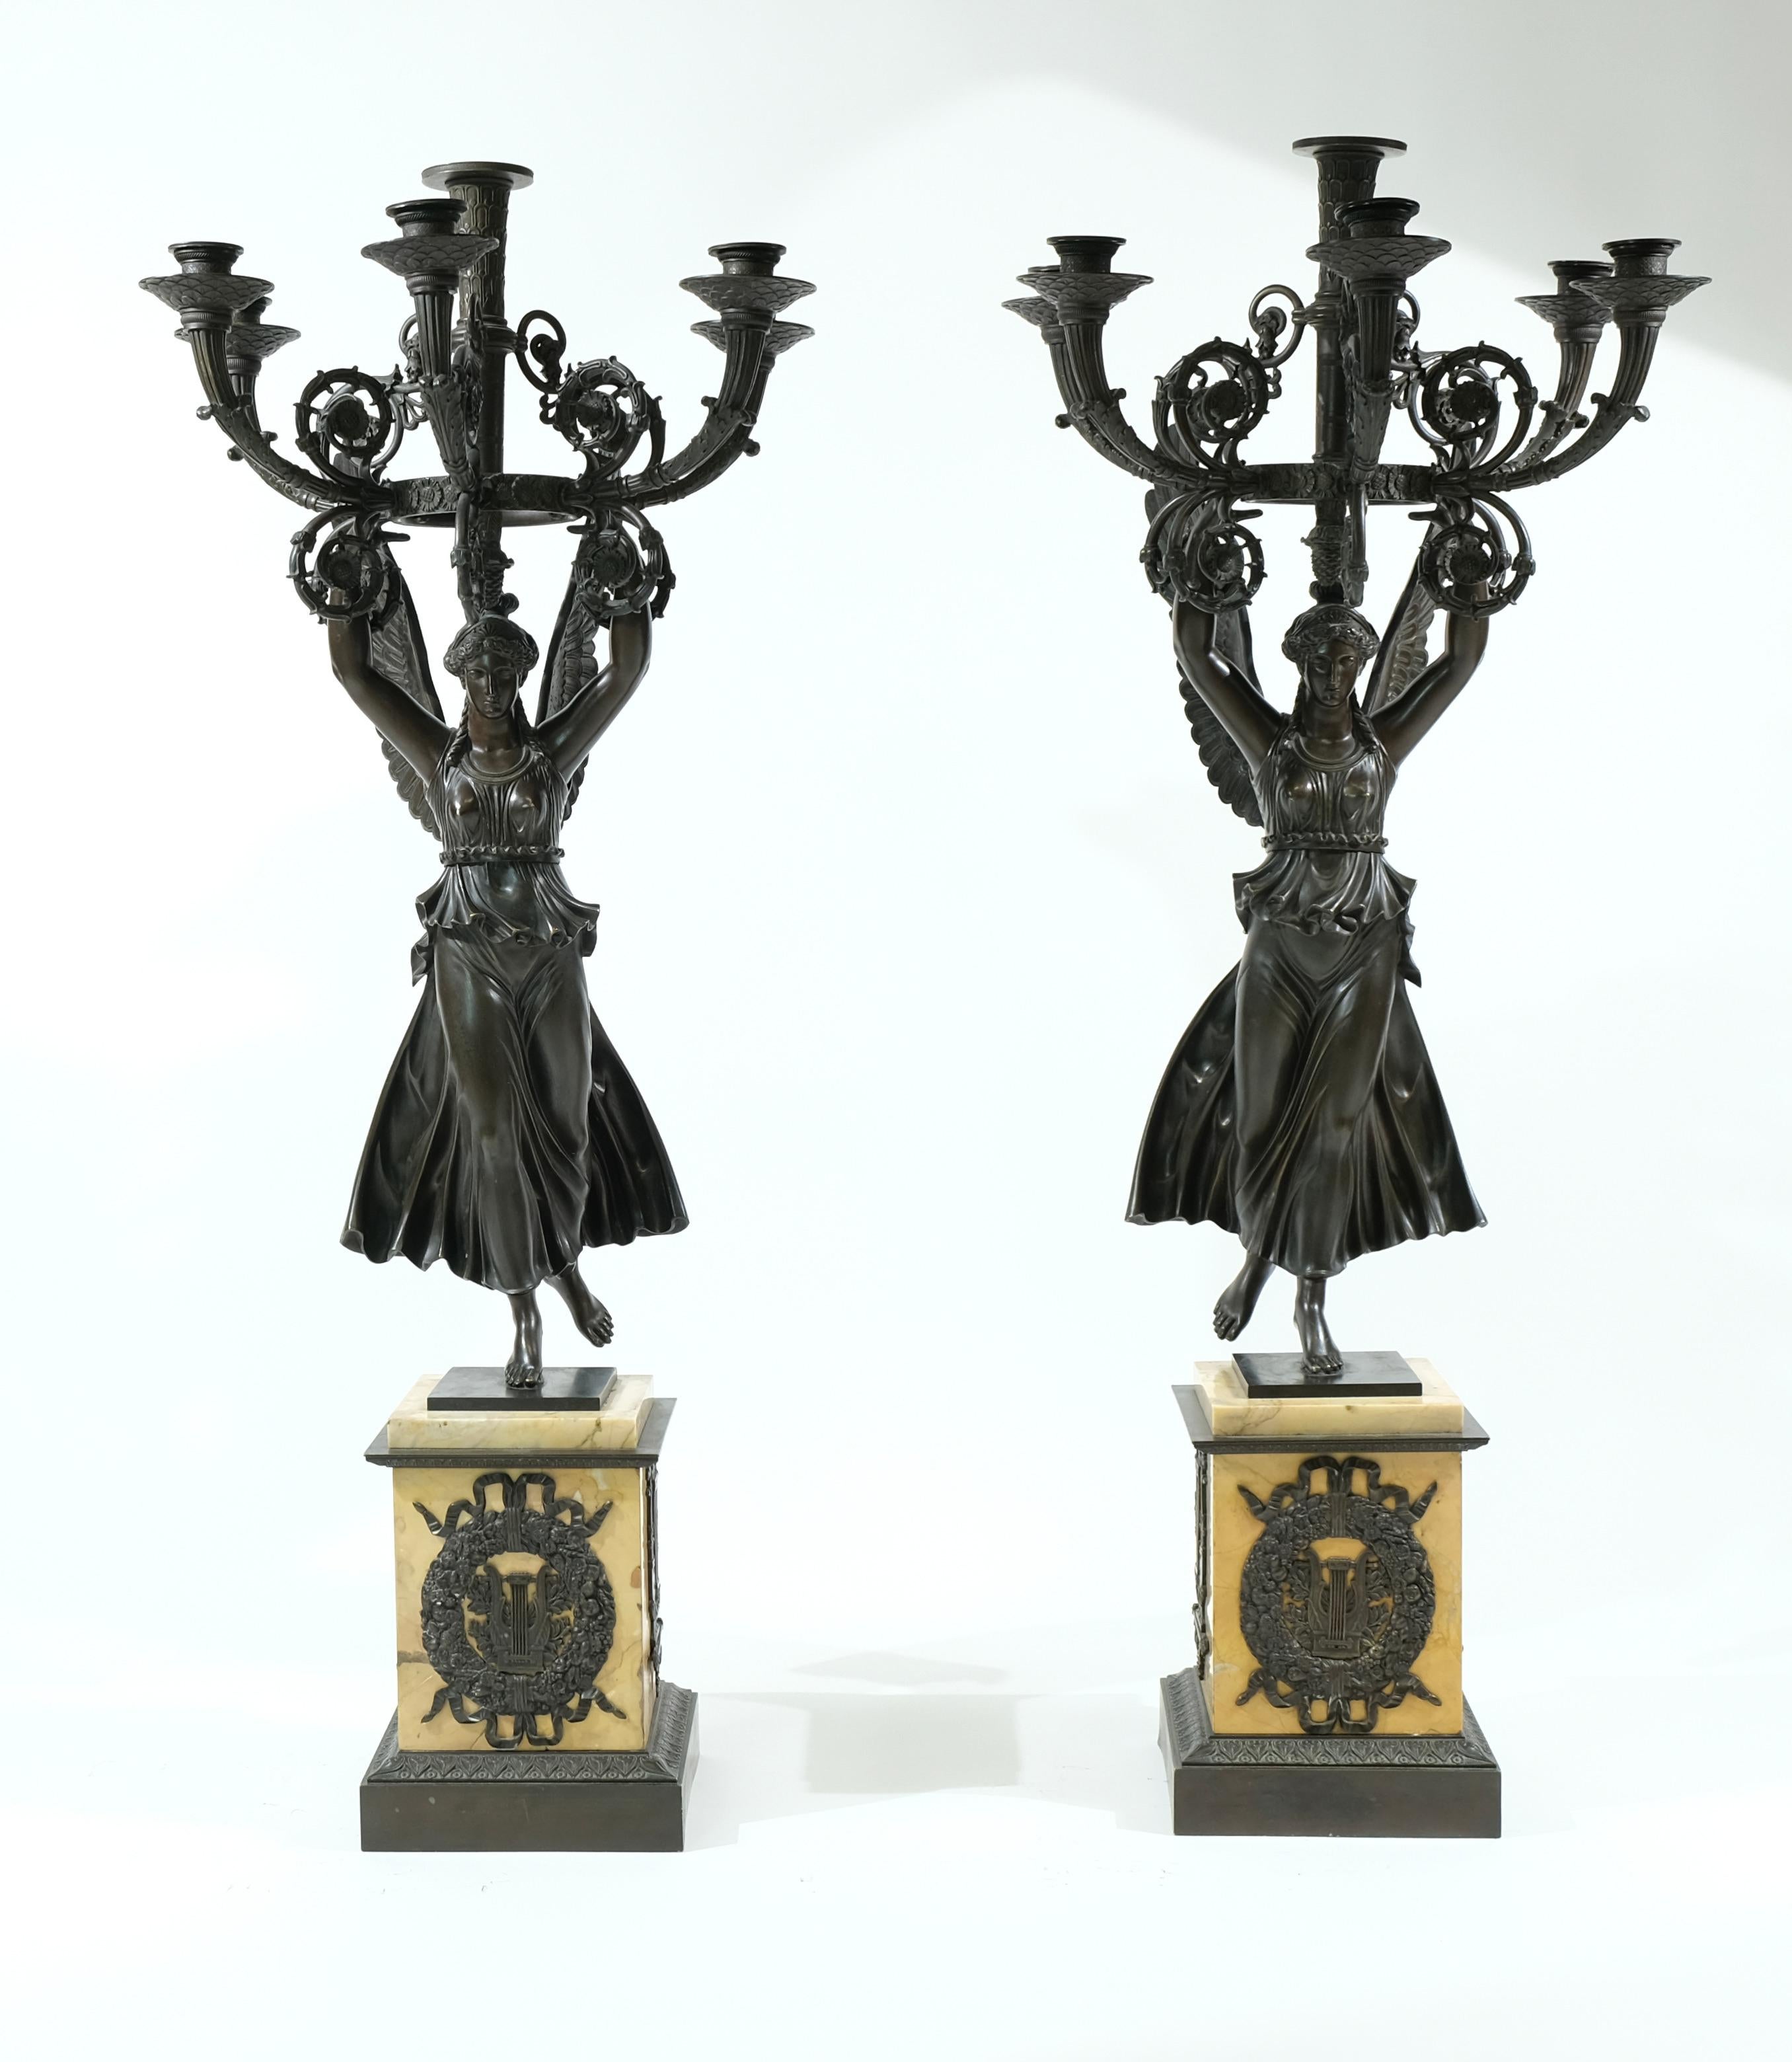 A pair of large Empire candelabra made around year 1815. The bases are made of Siena marble and mounted with bronze ornaments. On top the bases sculptures of Victory women are standing, each holding five branches with candleholders. The quality of